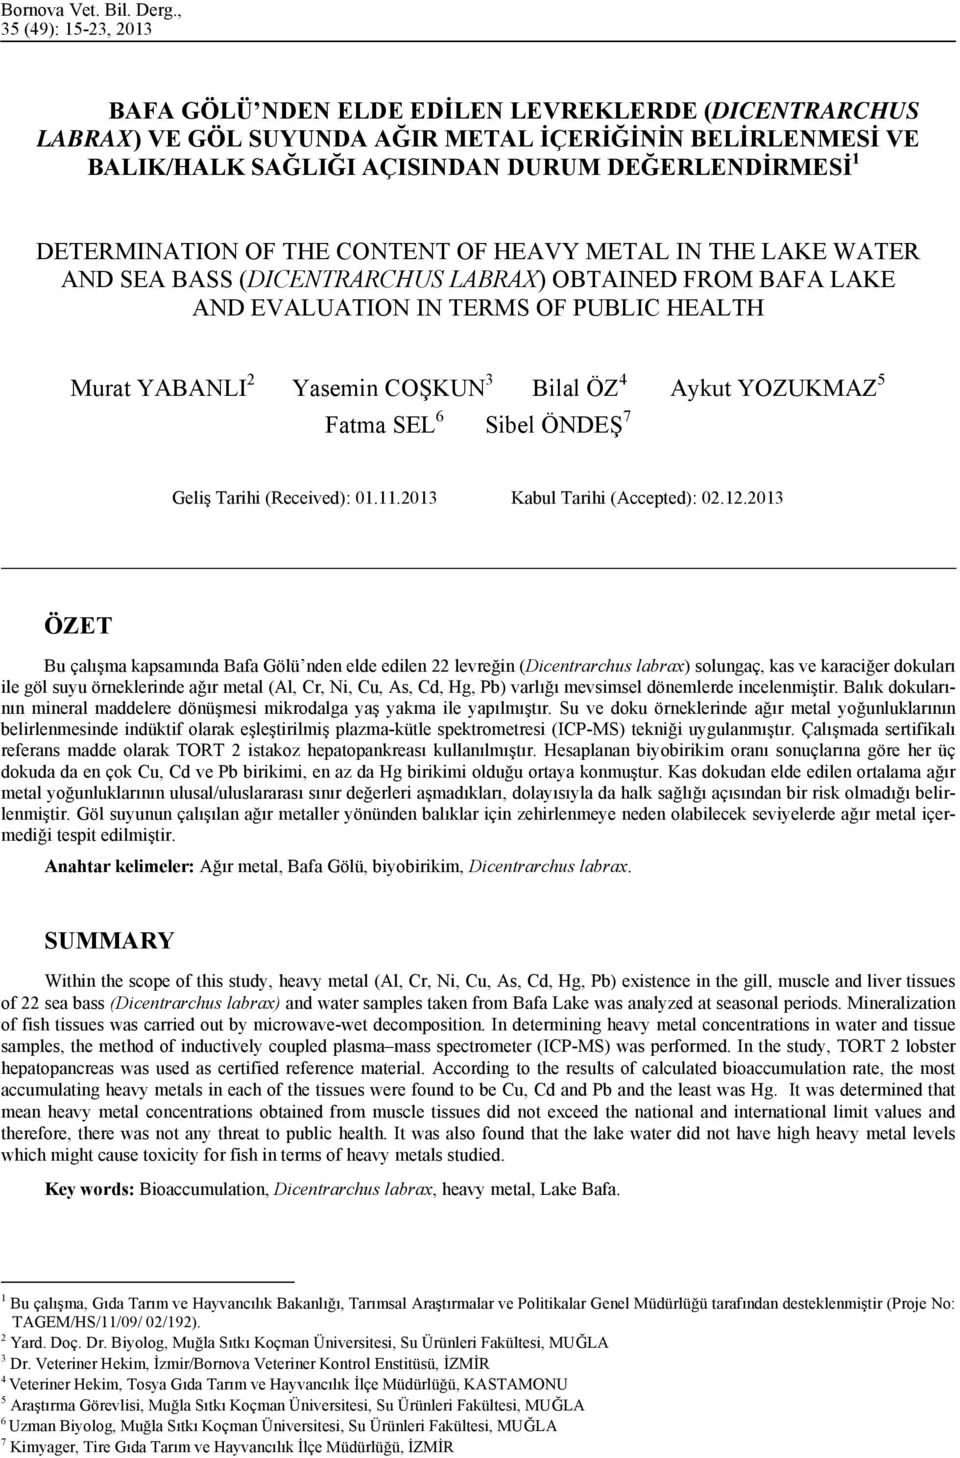 DETERMINATION OF THE CONTENT OF HEAVY METAL IN THE LAKE WATER AND SEA BASS (DICENTRARCHUS LABRAX) OBTAINED FROM BAFA LAKE AND EVALUATION IN TERMS OF PUBLIC HEALTH Murat YABANLI 2 Yasemin COŞKUN 3